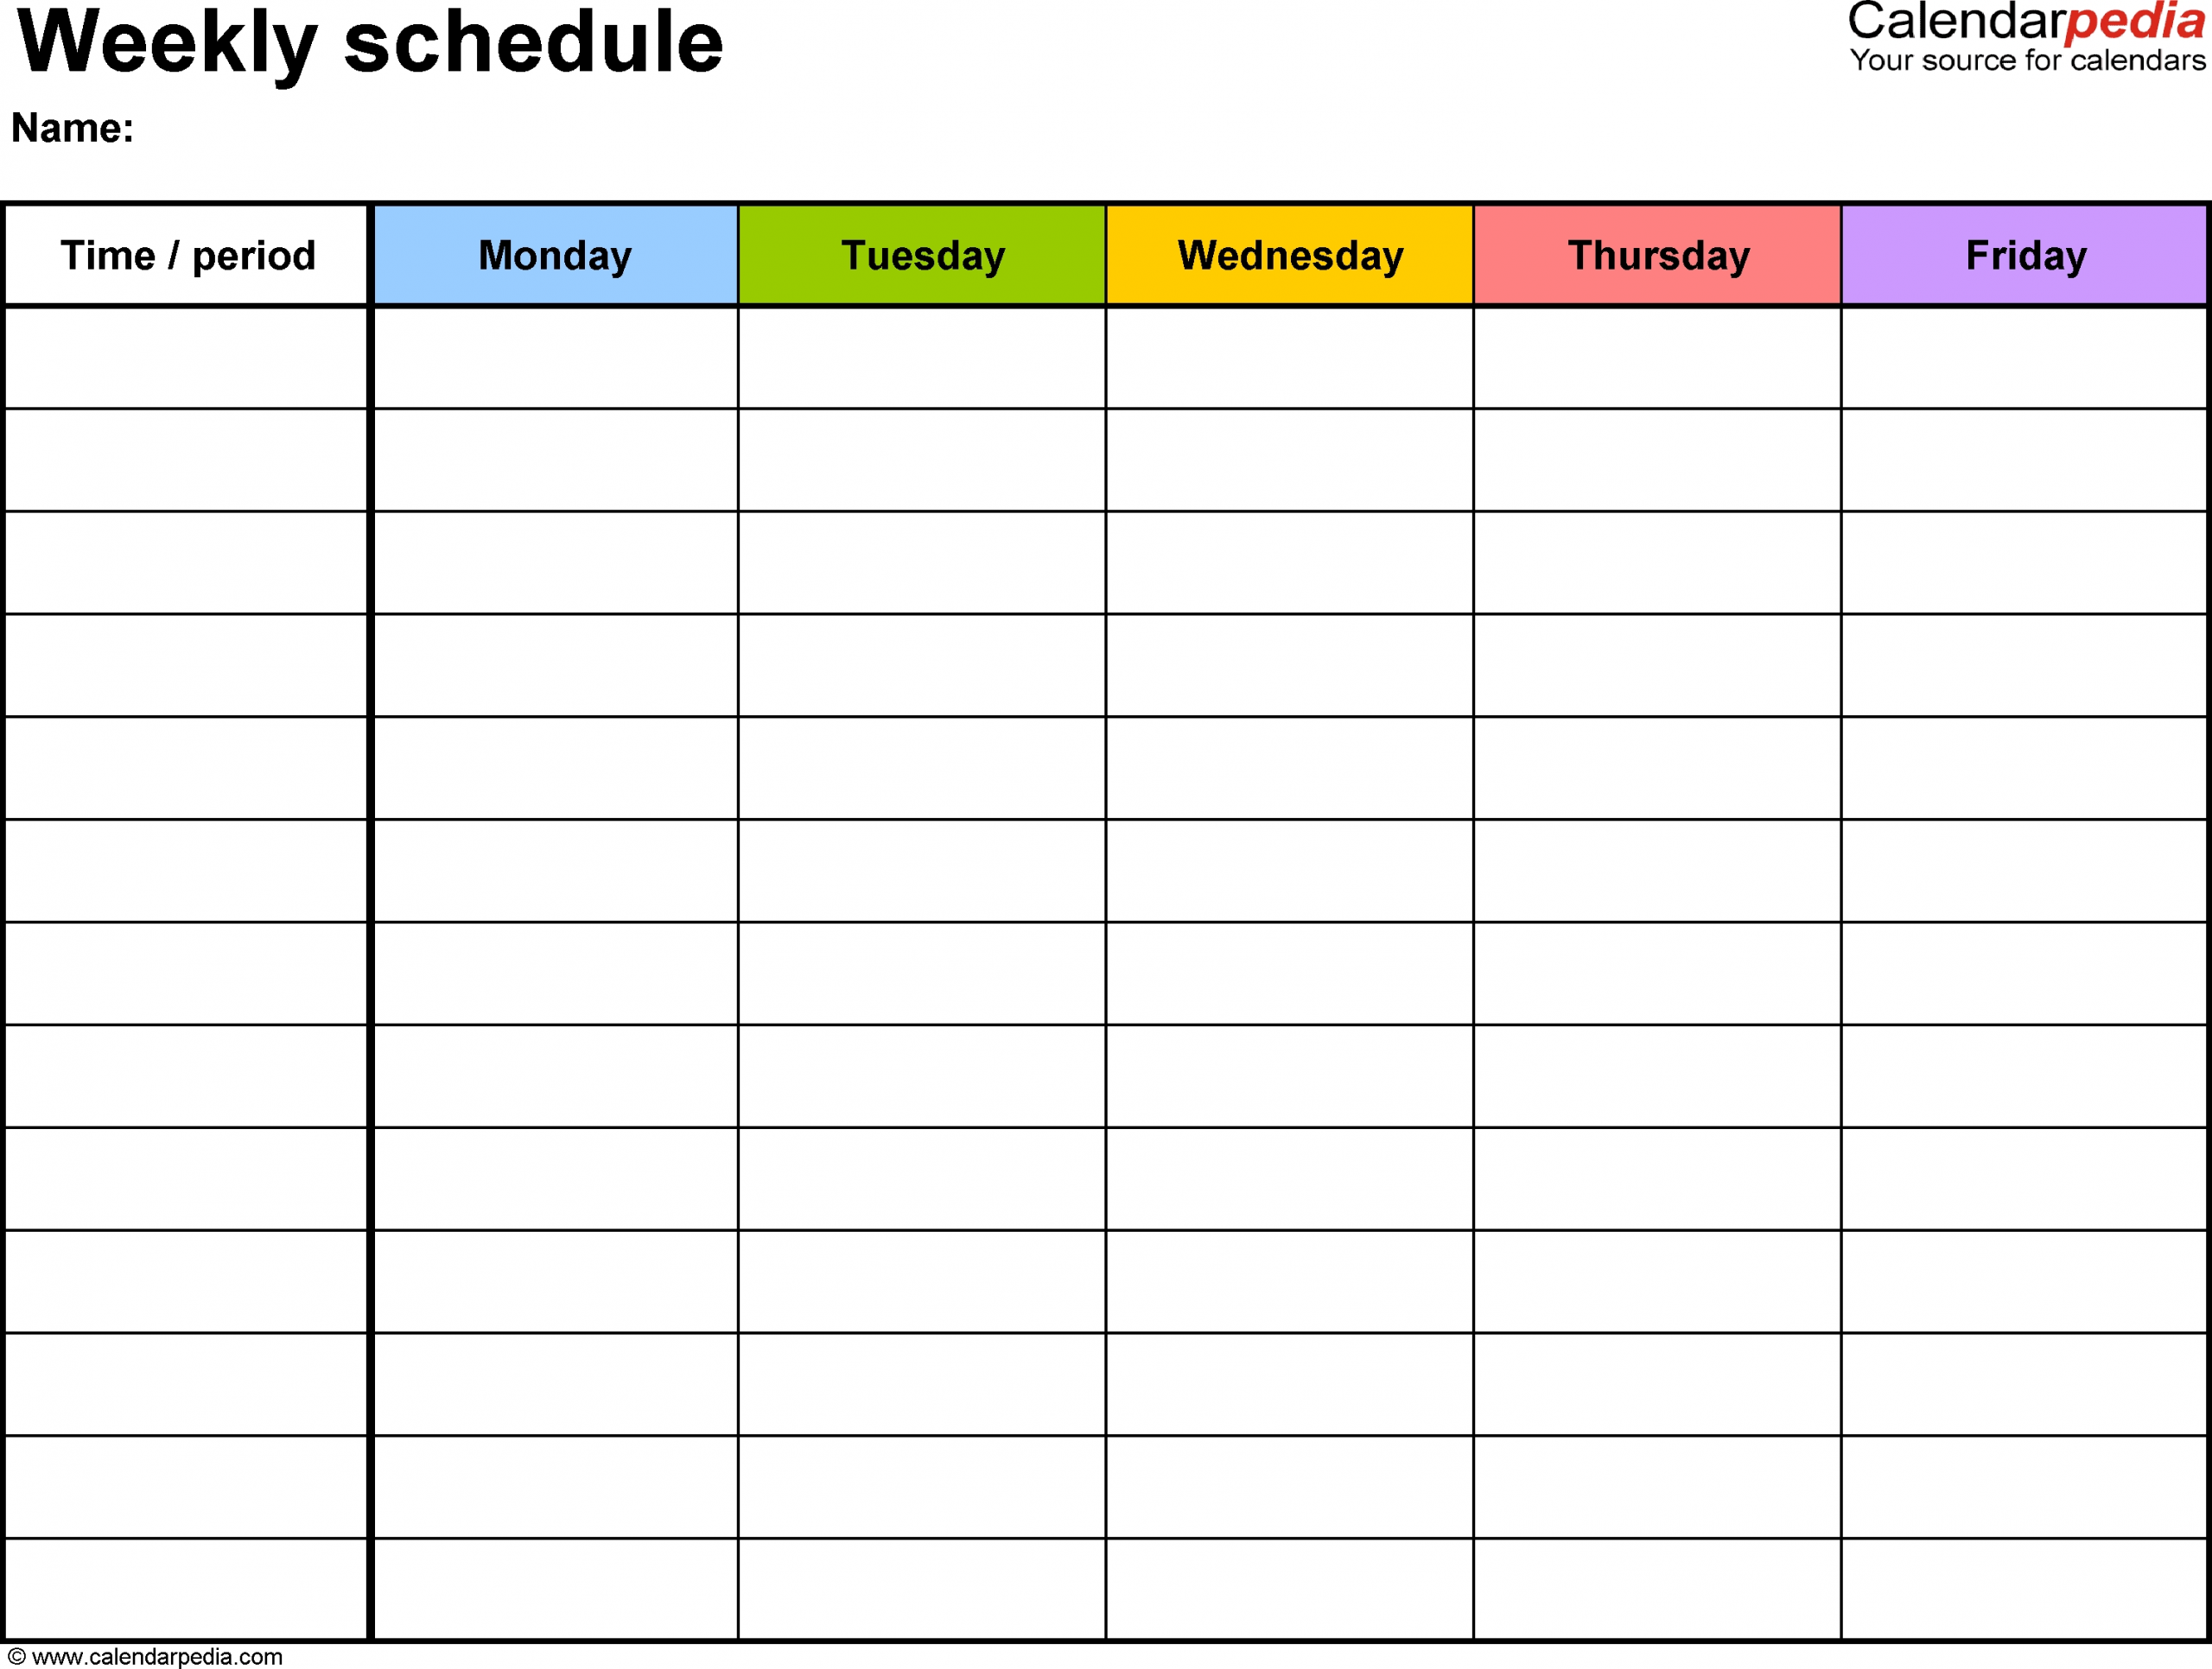 Free Weekly Schedule Templates For Excel - 18 Templates intended for One Week Daily Calendar Printable